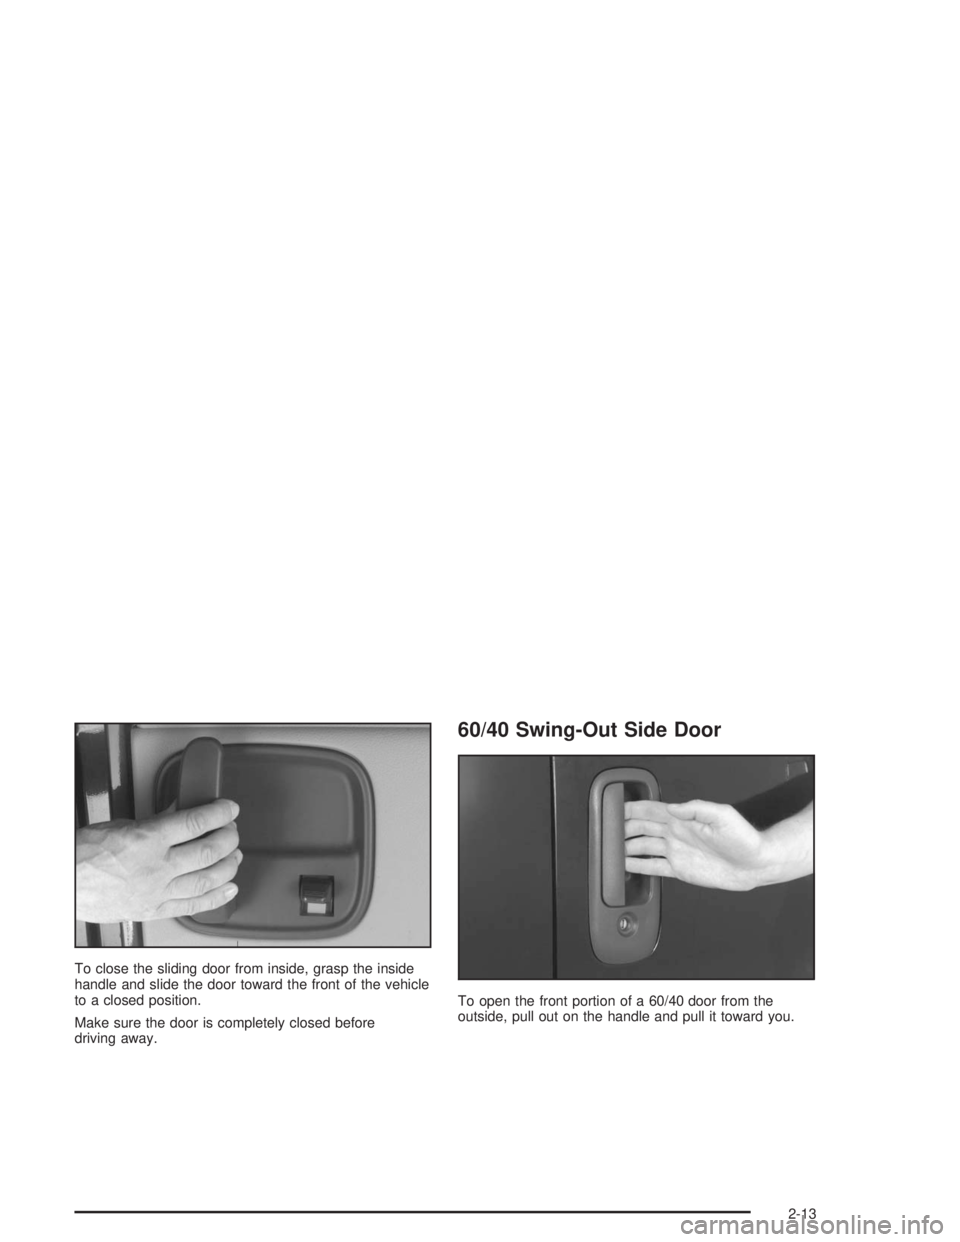 GMC SAVANA 2004  Owners Manual To close the sliding door from inside, grasp the inside
handle and slide the door toward the front of the vehicle
to a closed position.
Make sure the door is completely closed before
driving away.
60/